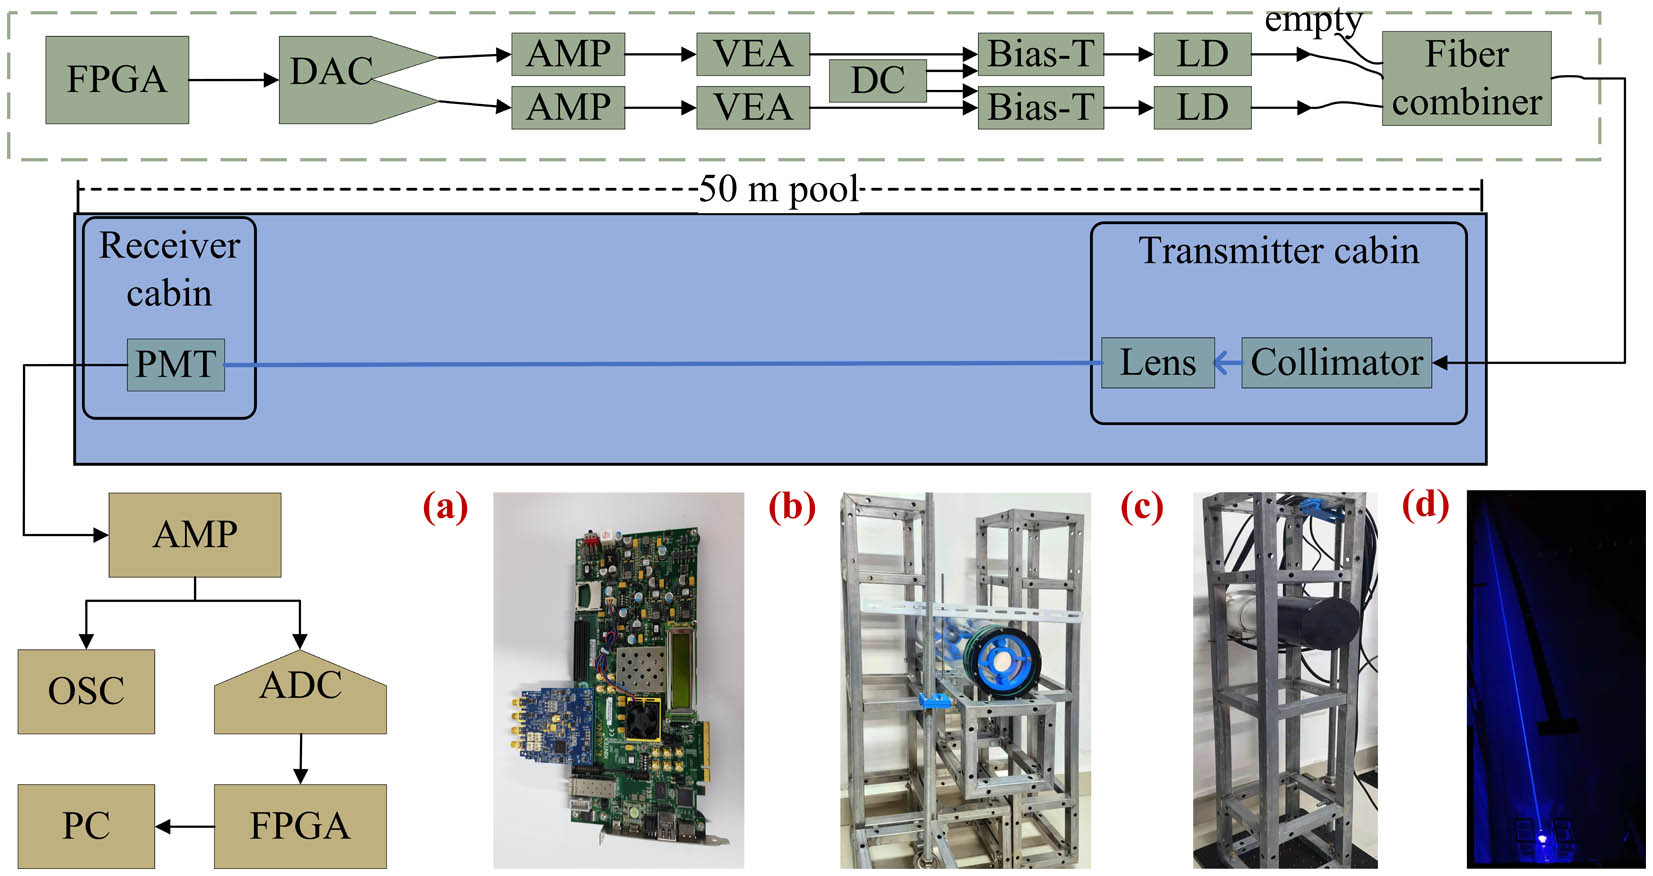 Experimental setup diagram of the proposed UWOC system based on the FPGA and a fiber combiner. Inserts: (a) the FPGA, (b) the transmitter cabin, (c) the receiver cabin, and (d) the transmitter cabin in a 50 m swimming pool.